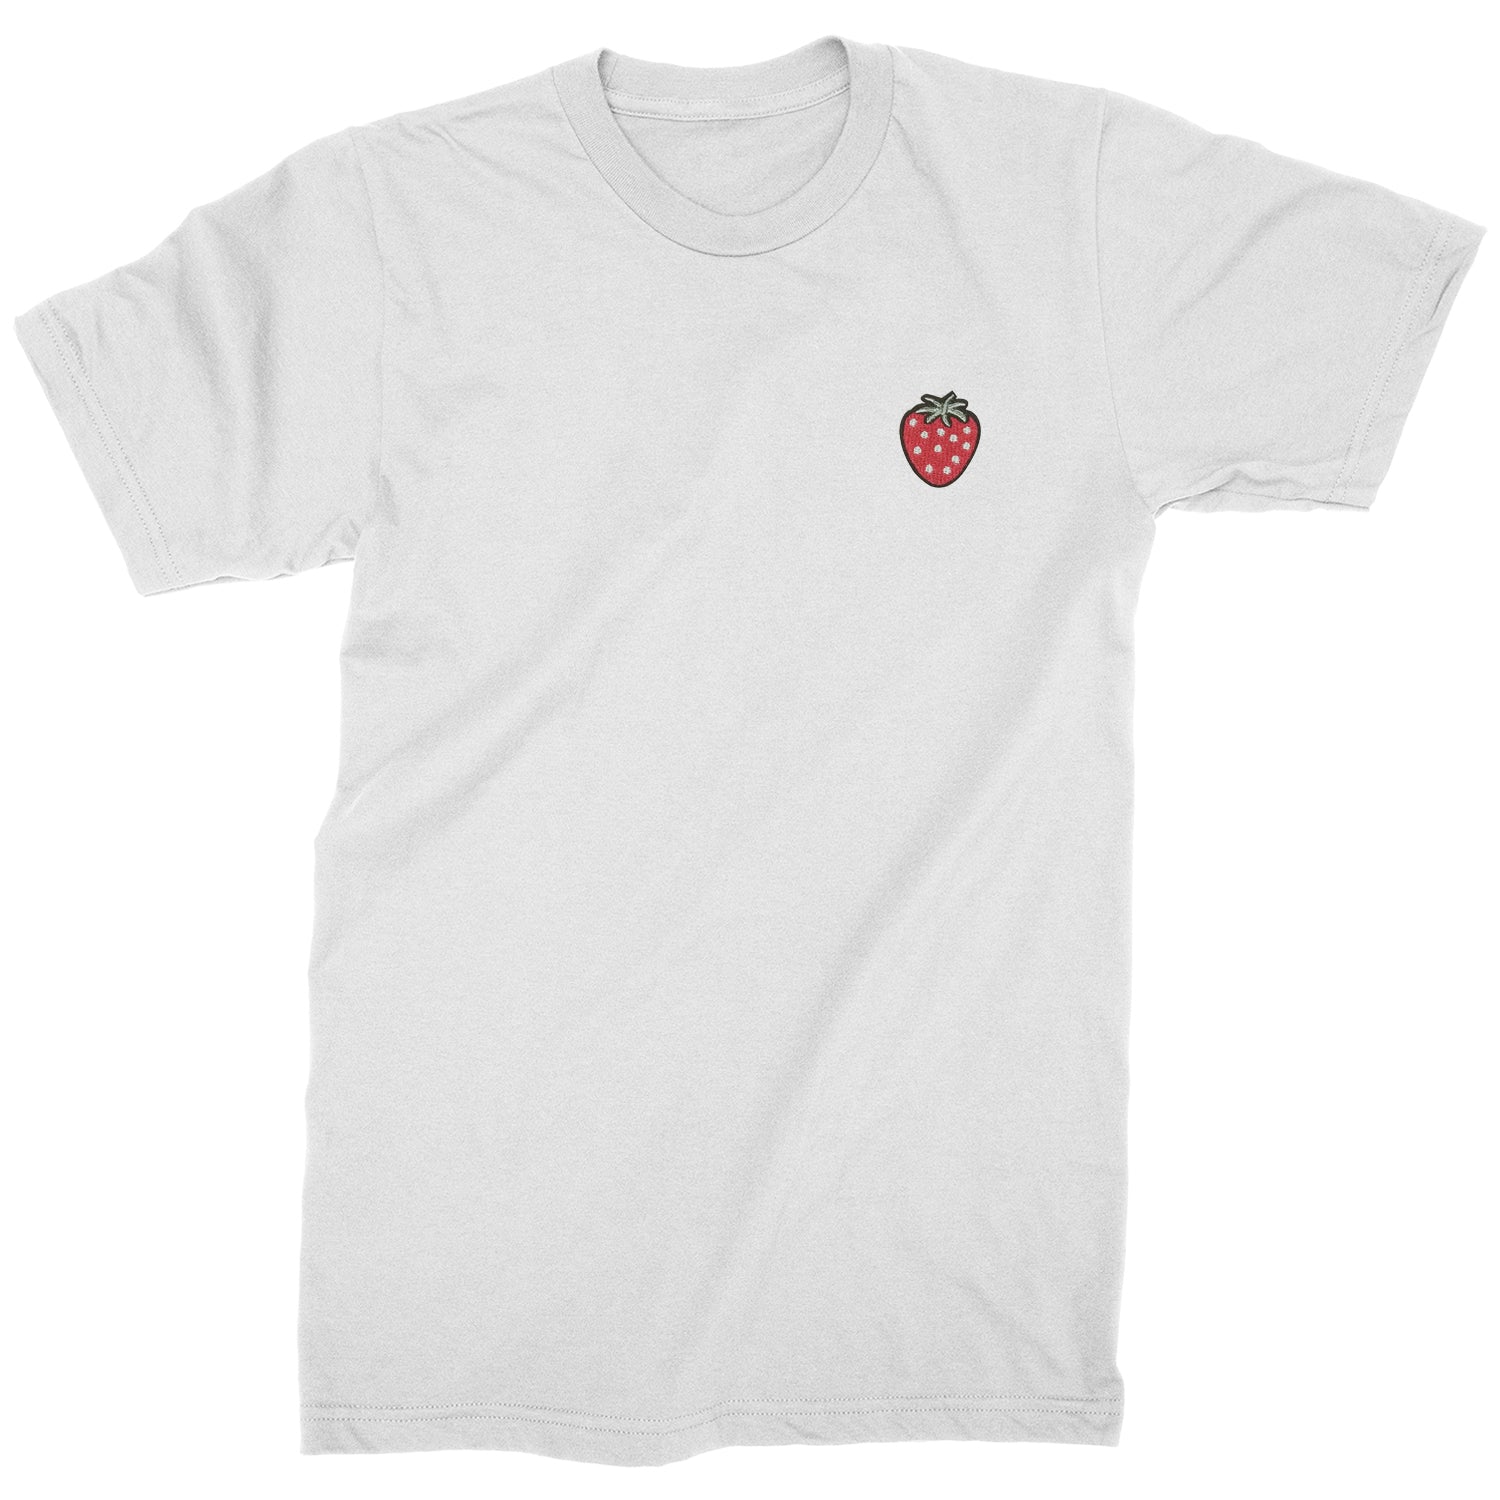 Embroidered Strawberry Patch (Pocket Print) Mens T-shirt fruit, strawberries by Expression Tees